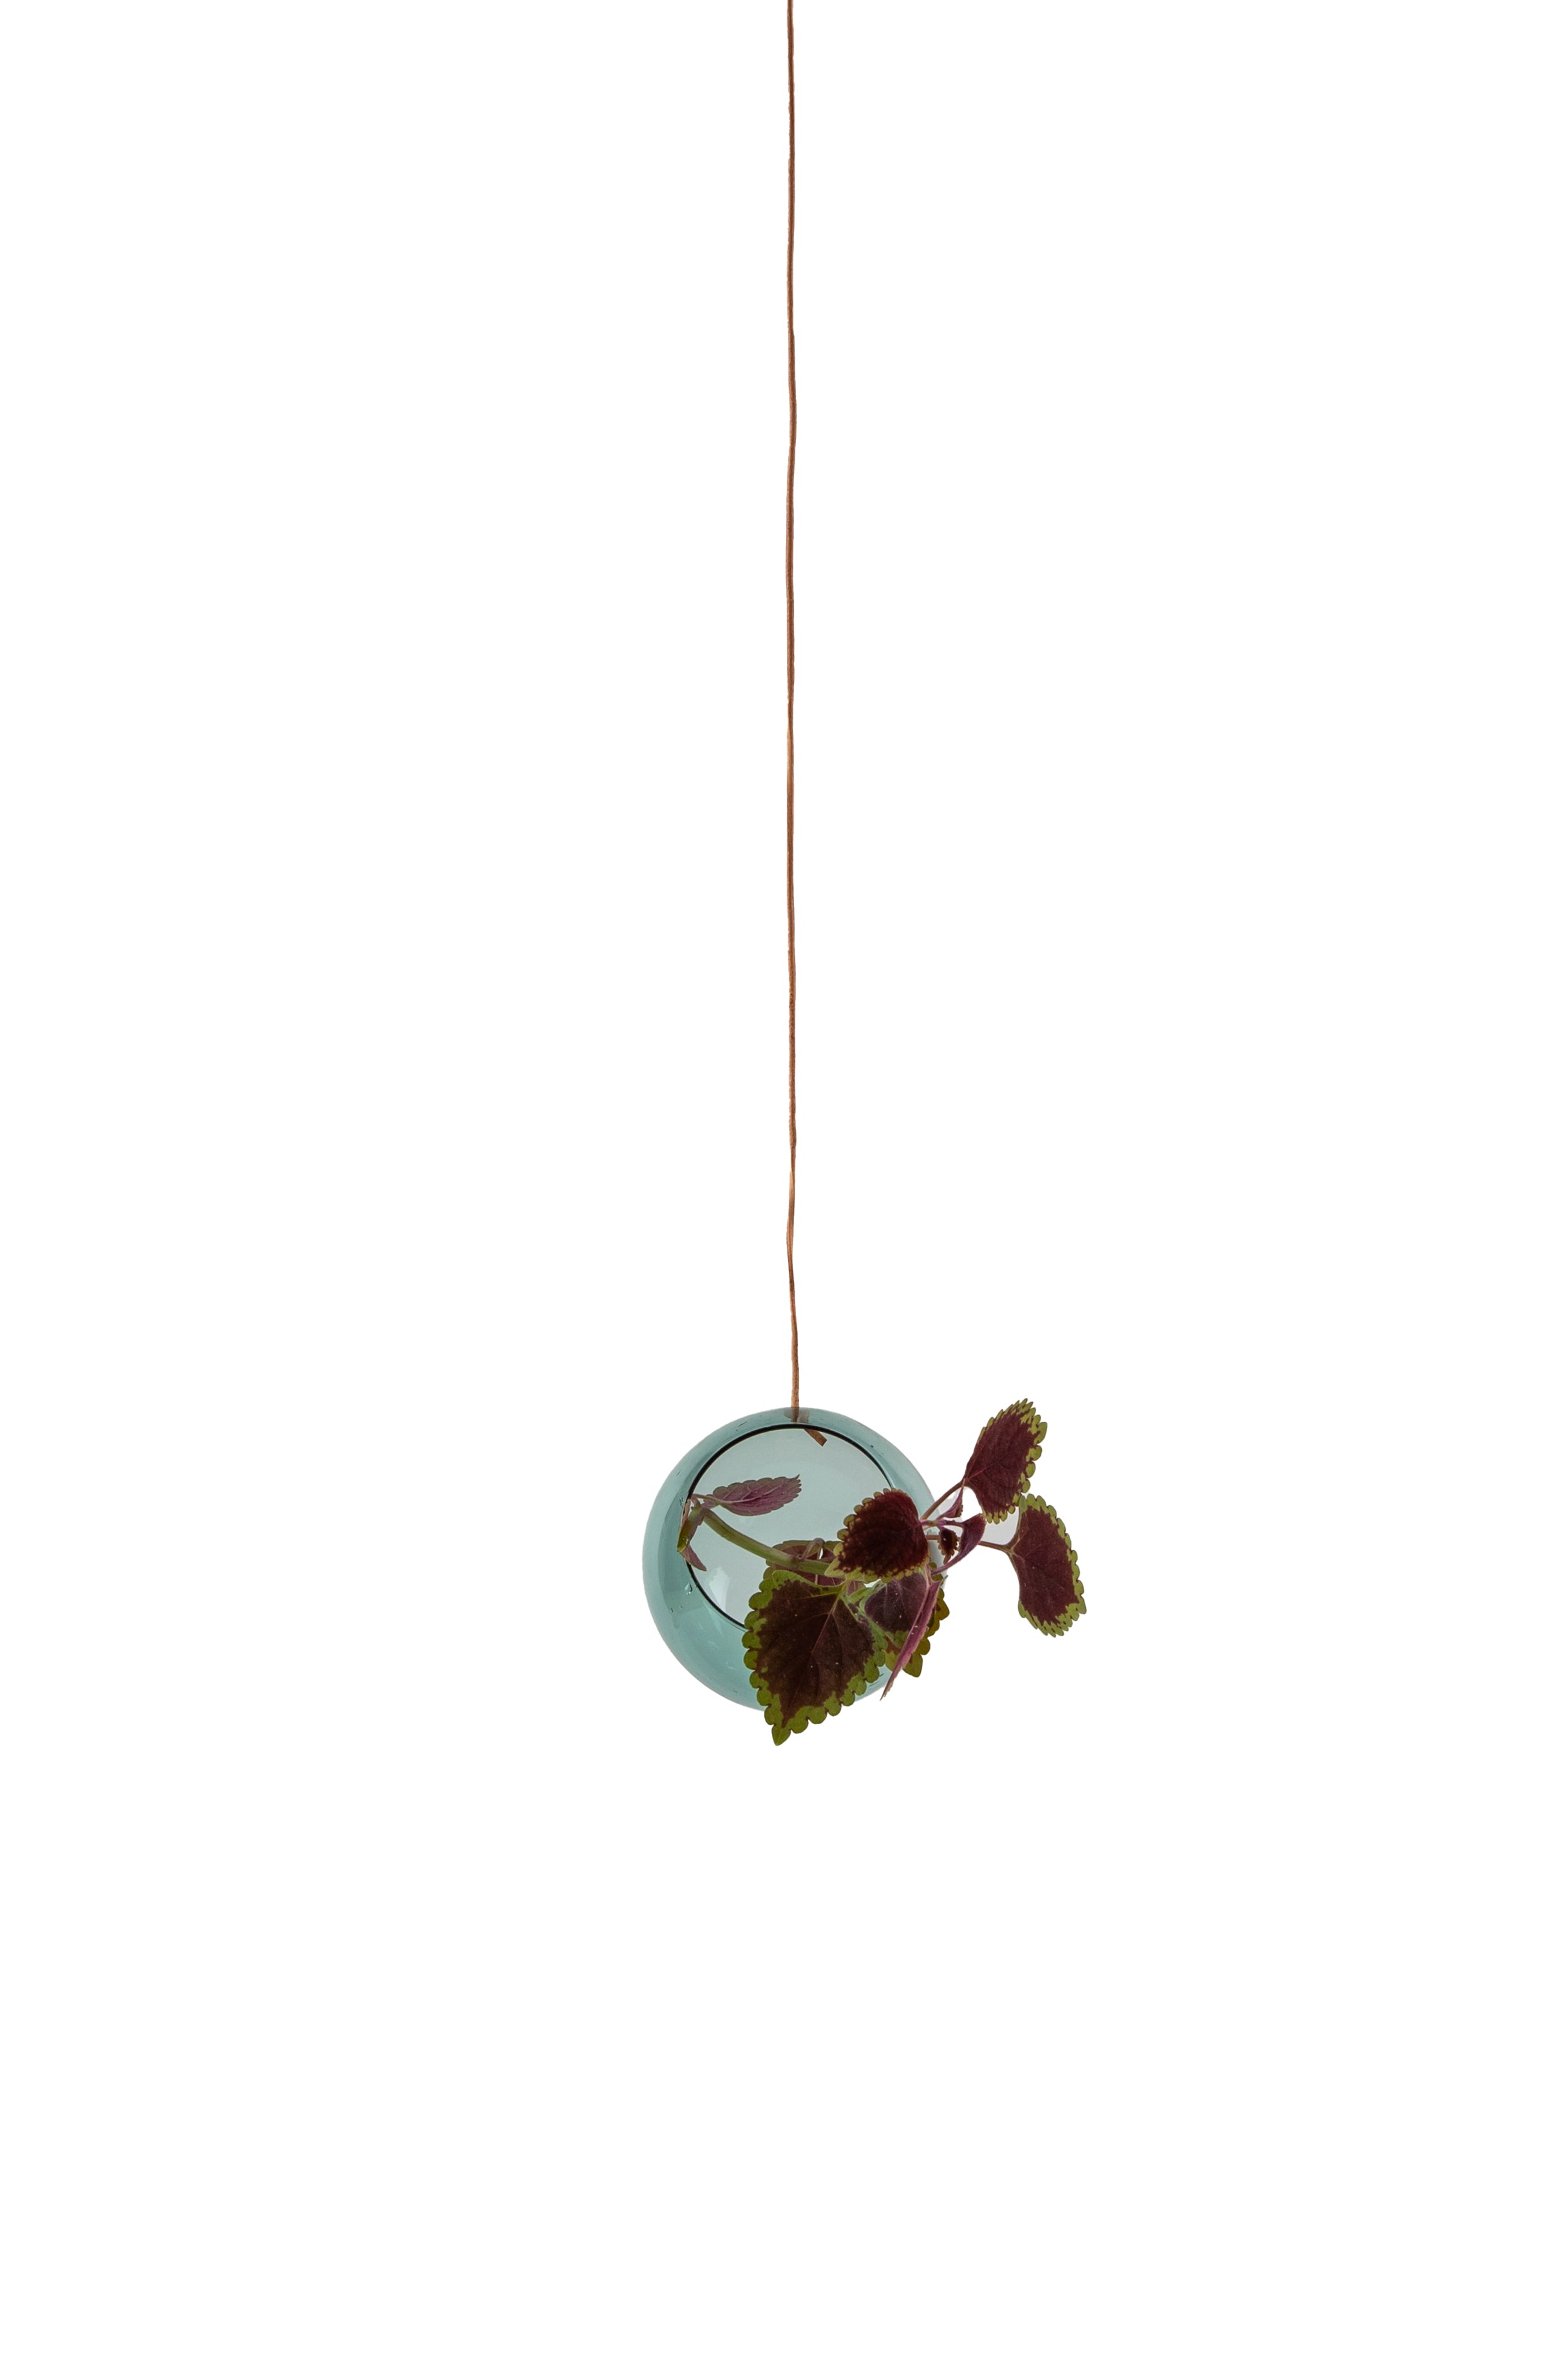 Studio About Hanging Plant Bubble Vase Small, Cyan